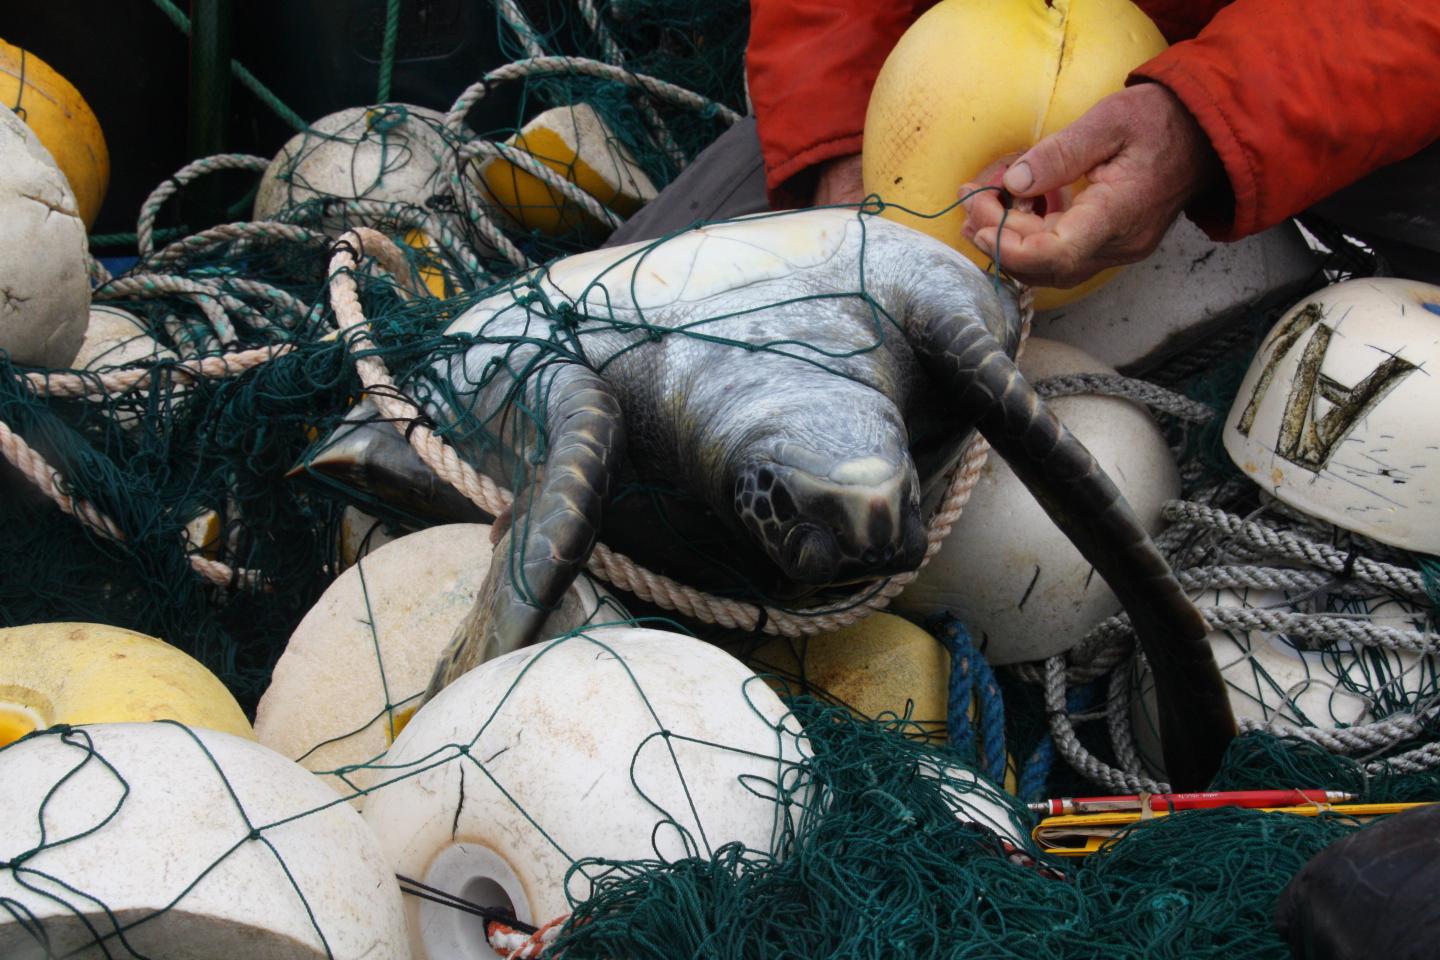 A Green Turtle Caught in a Fishing Net